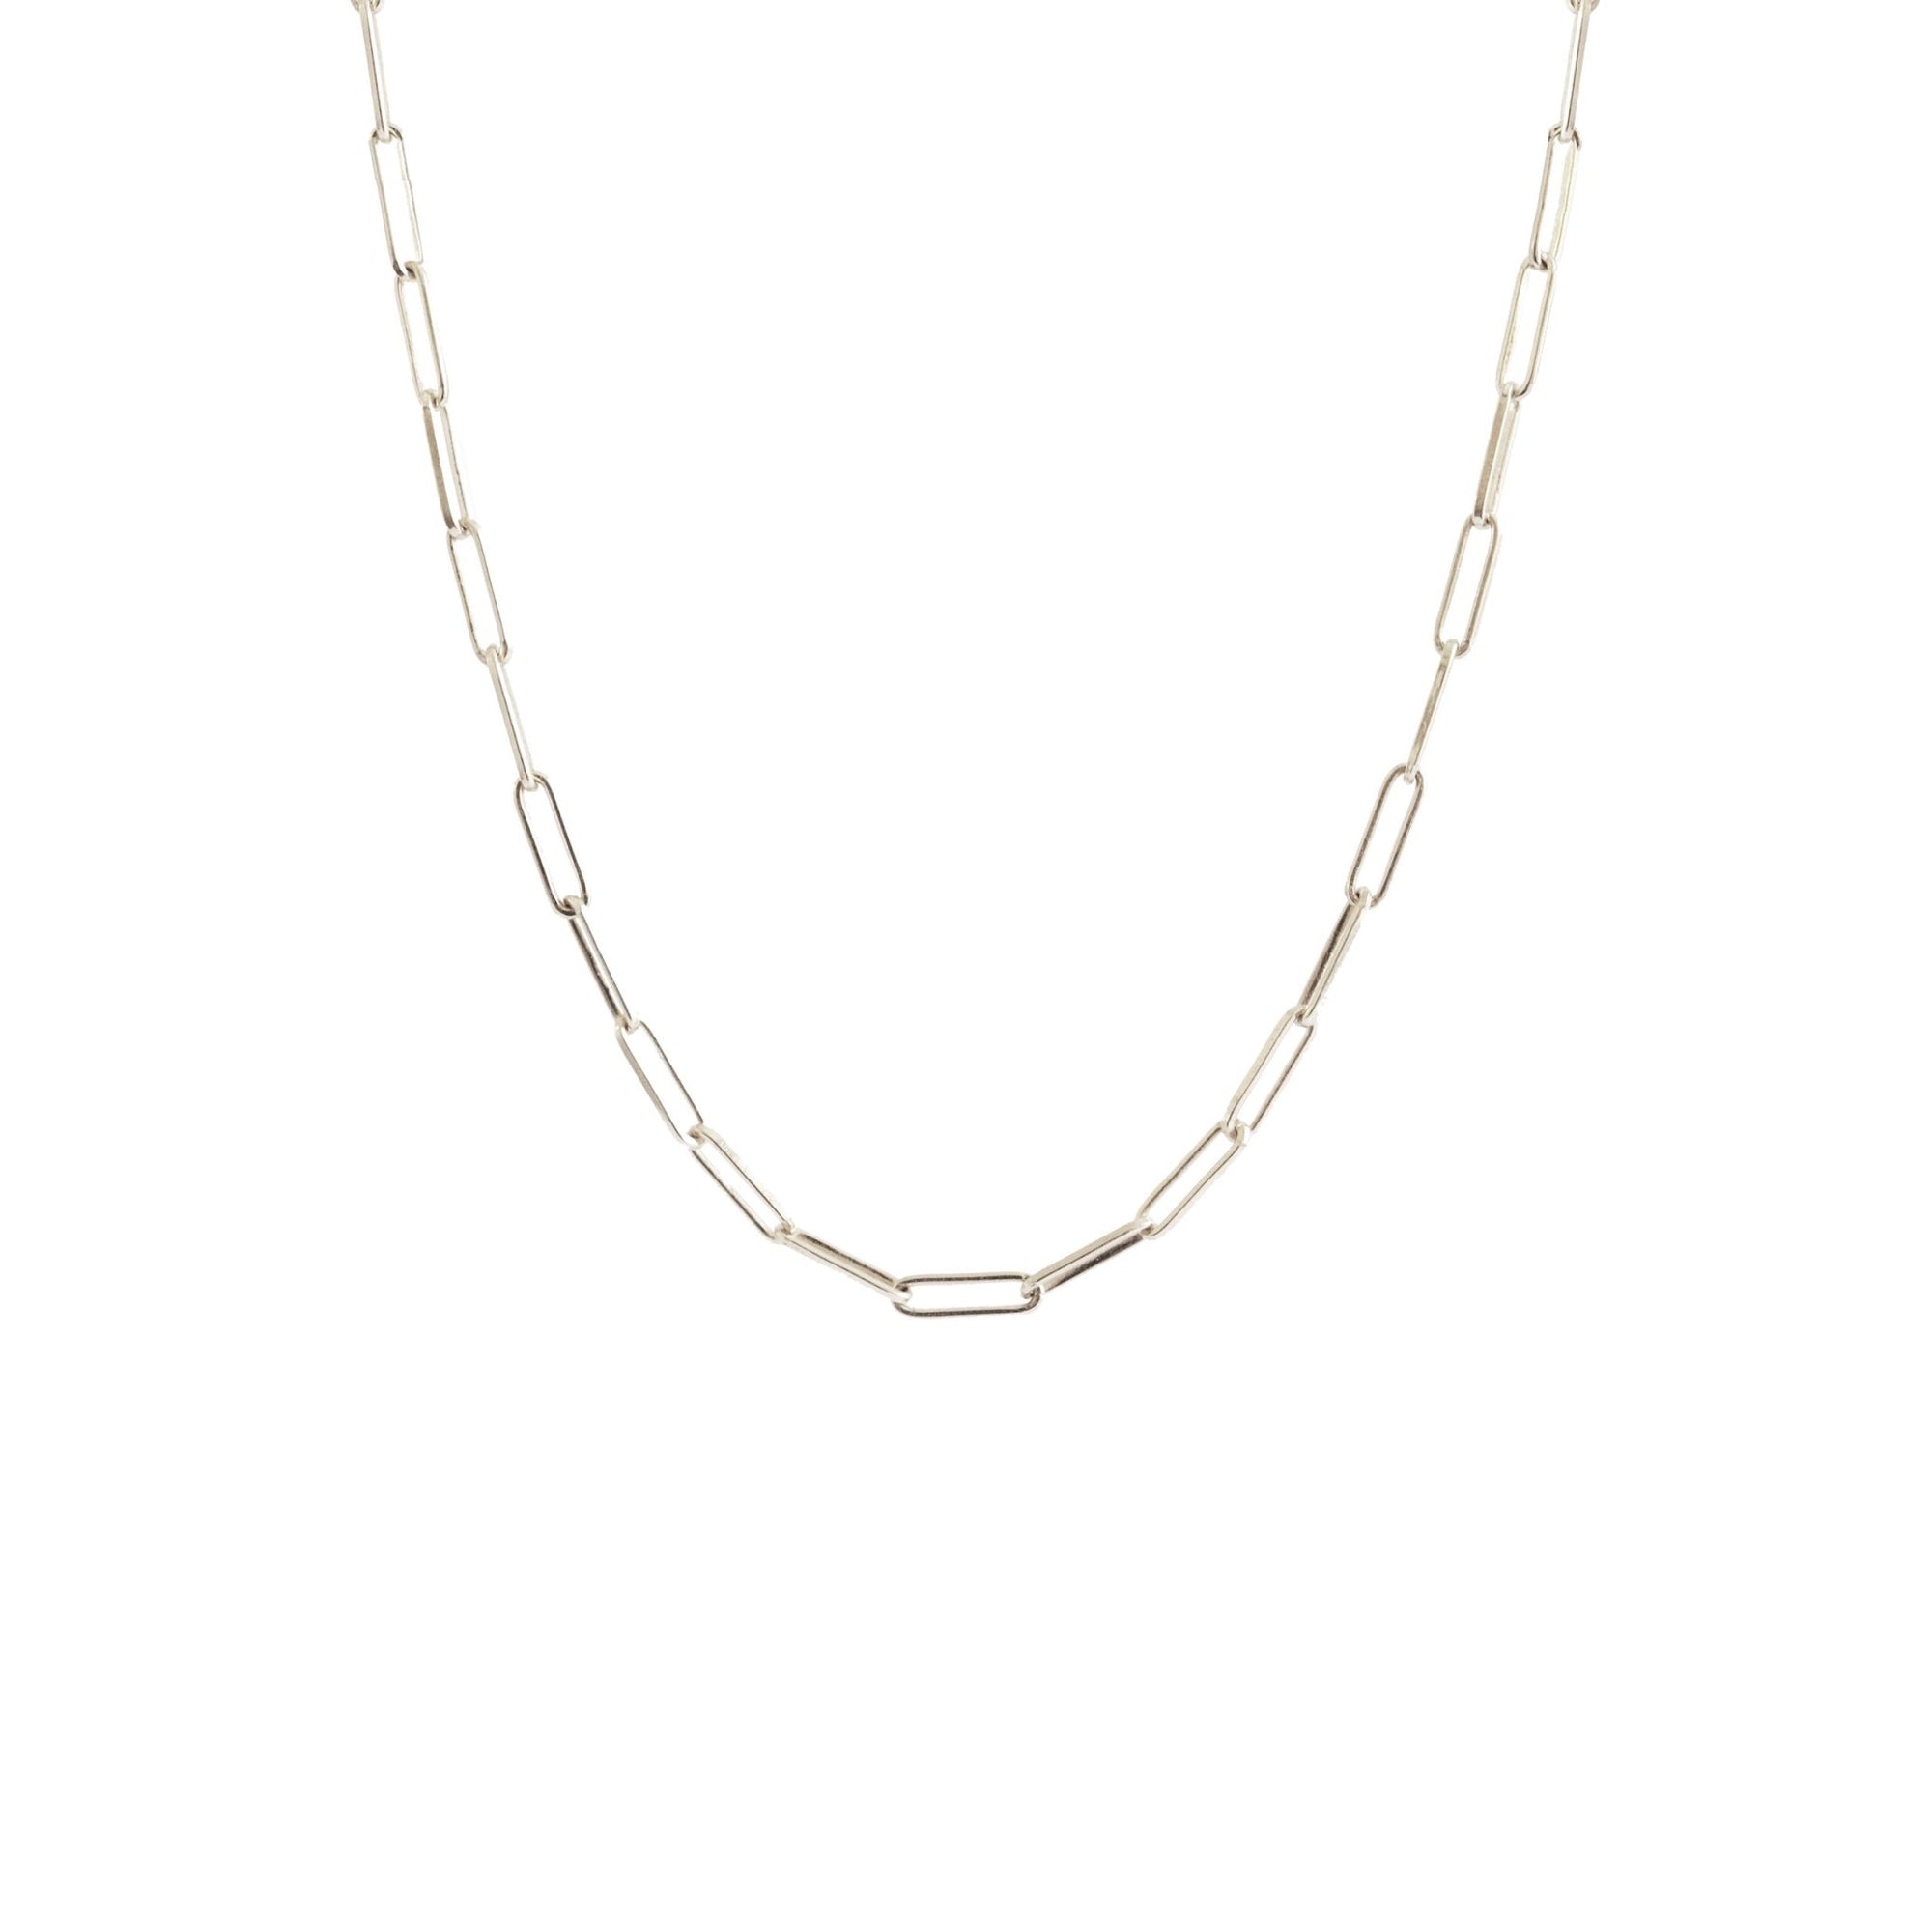 POISE SHORT OVAL LINK NECKLACE - SILVER 17" - SO PRETTY CARA COTTER